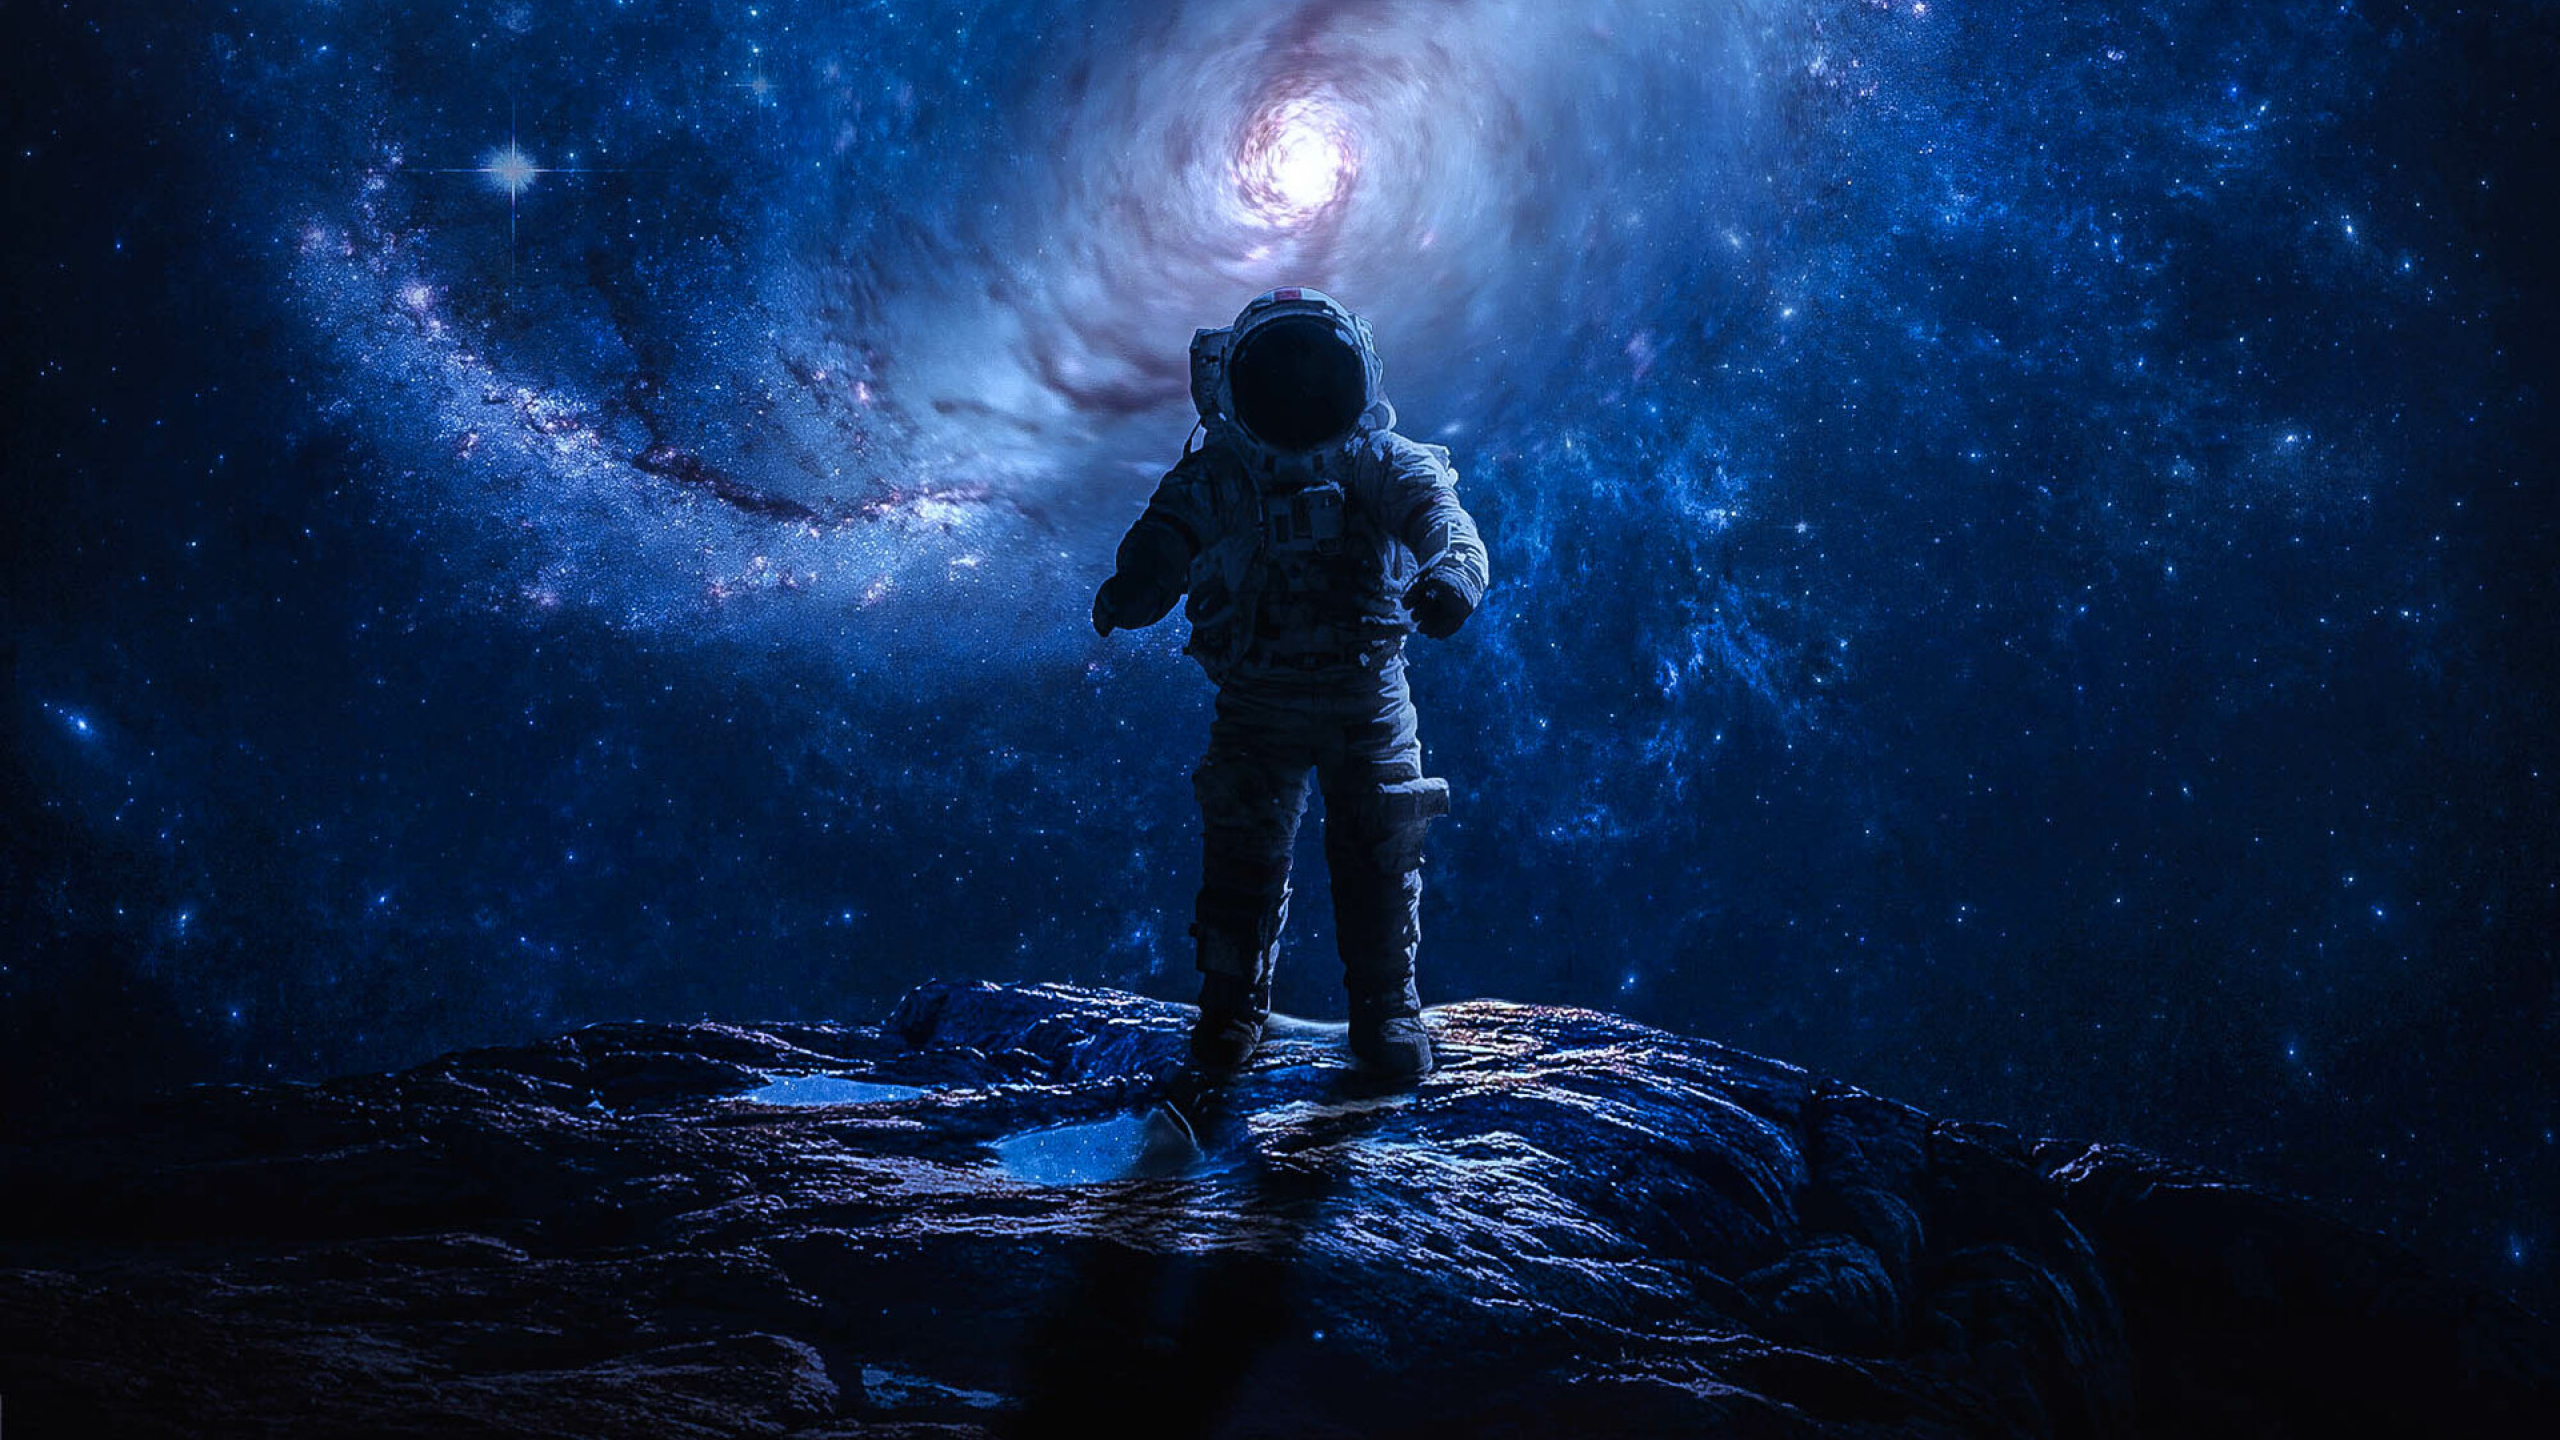 Space WQHD, QHD, 16:9 Wallpapers, Images and Pictures - Download Free  Backgrounds